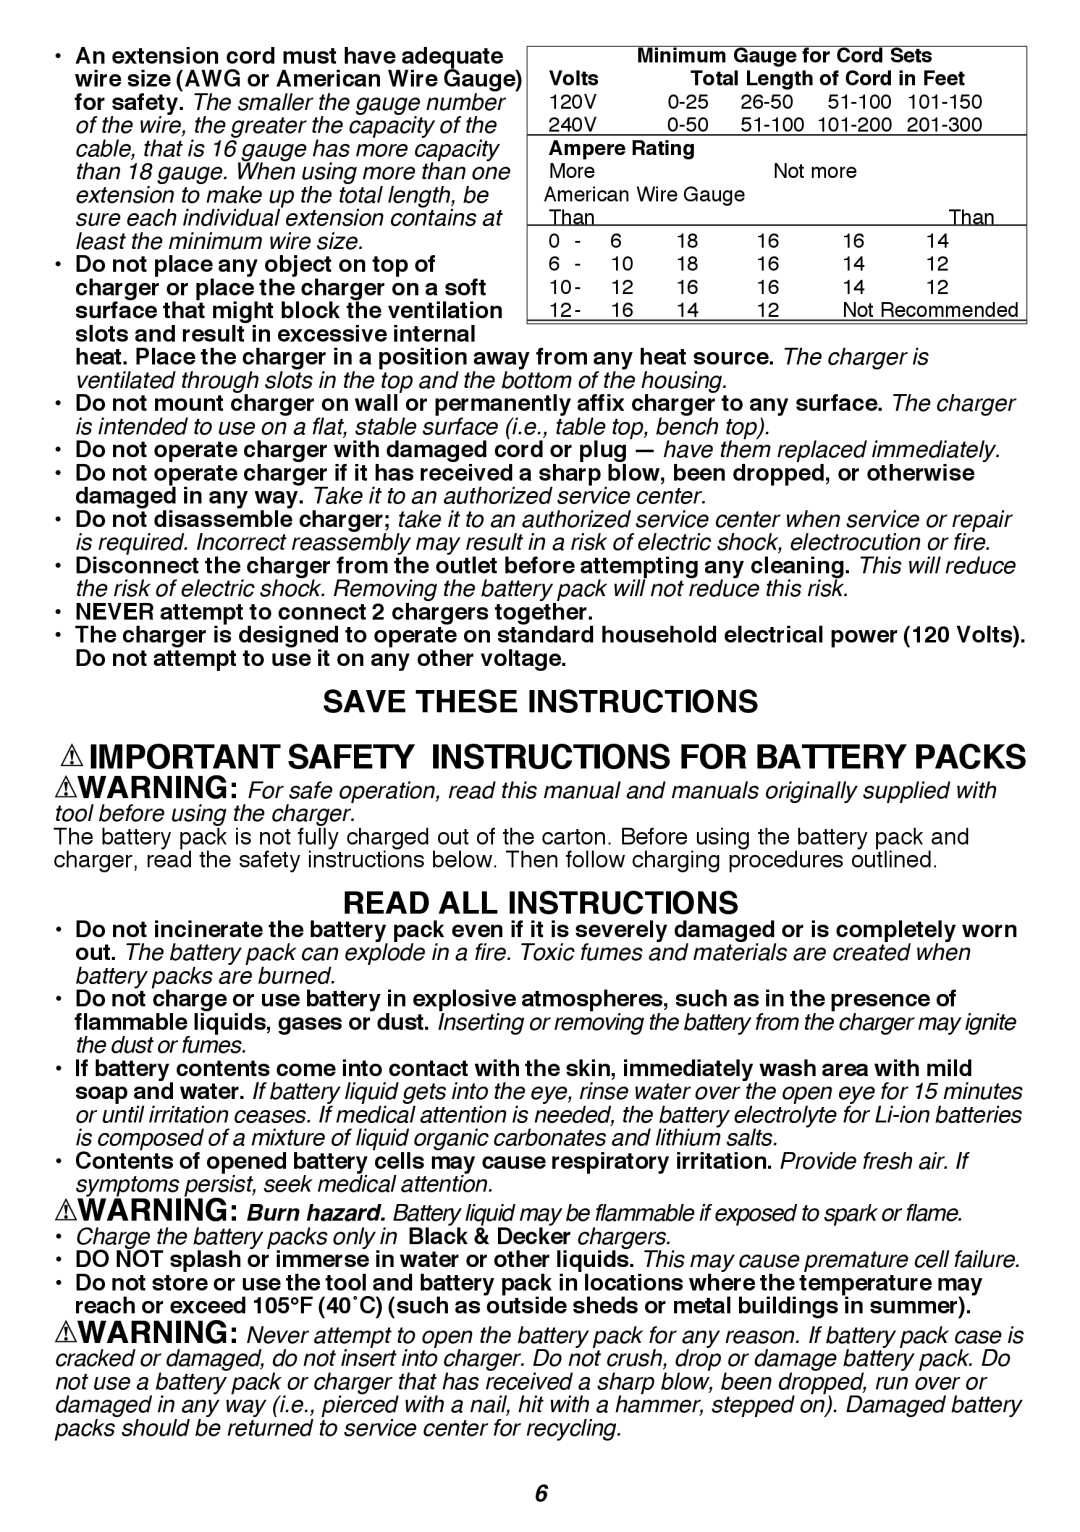 Black & Decker LST300R Important Safety Instructions For Battery Packs, Save These Instructions, Read all Instructions 